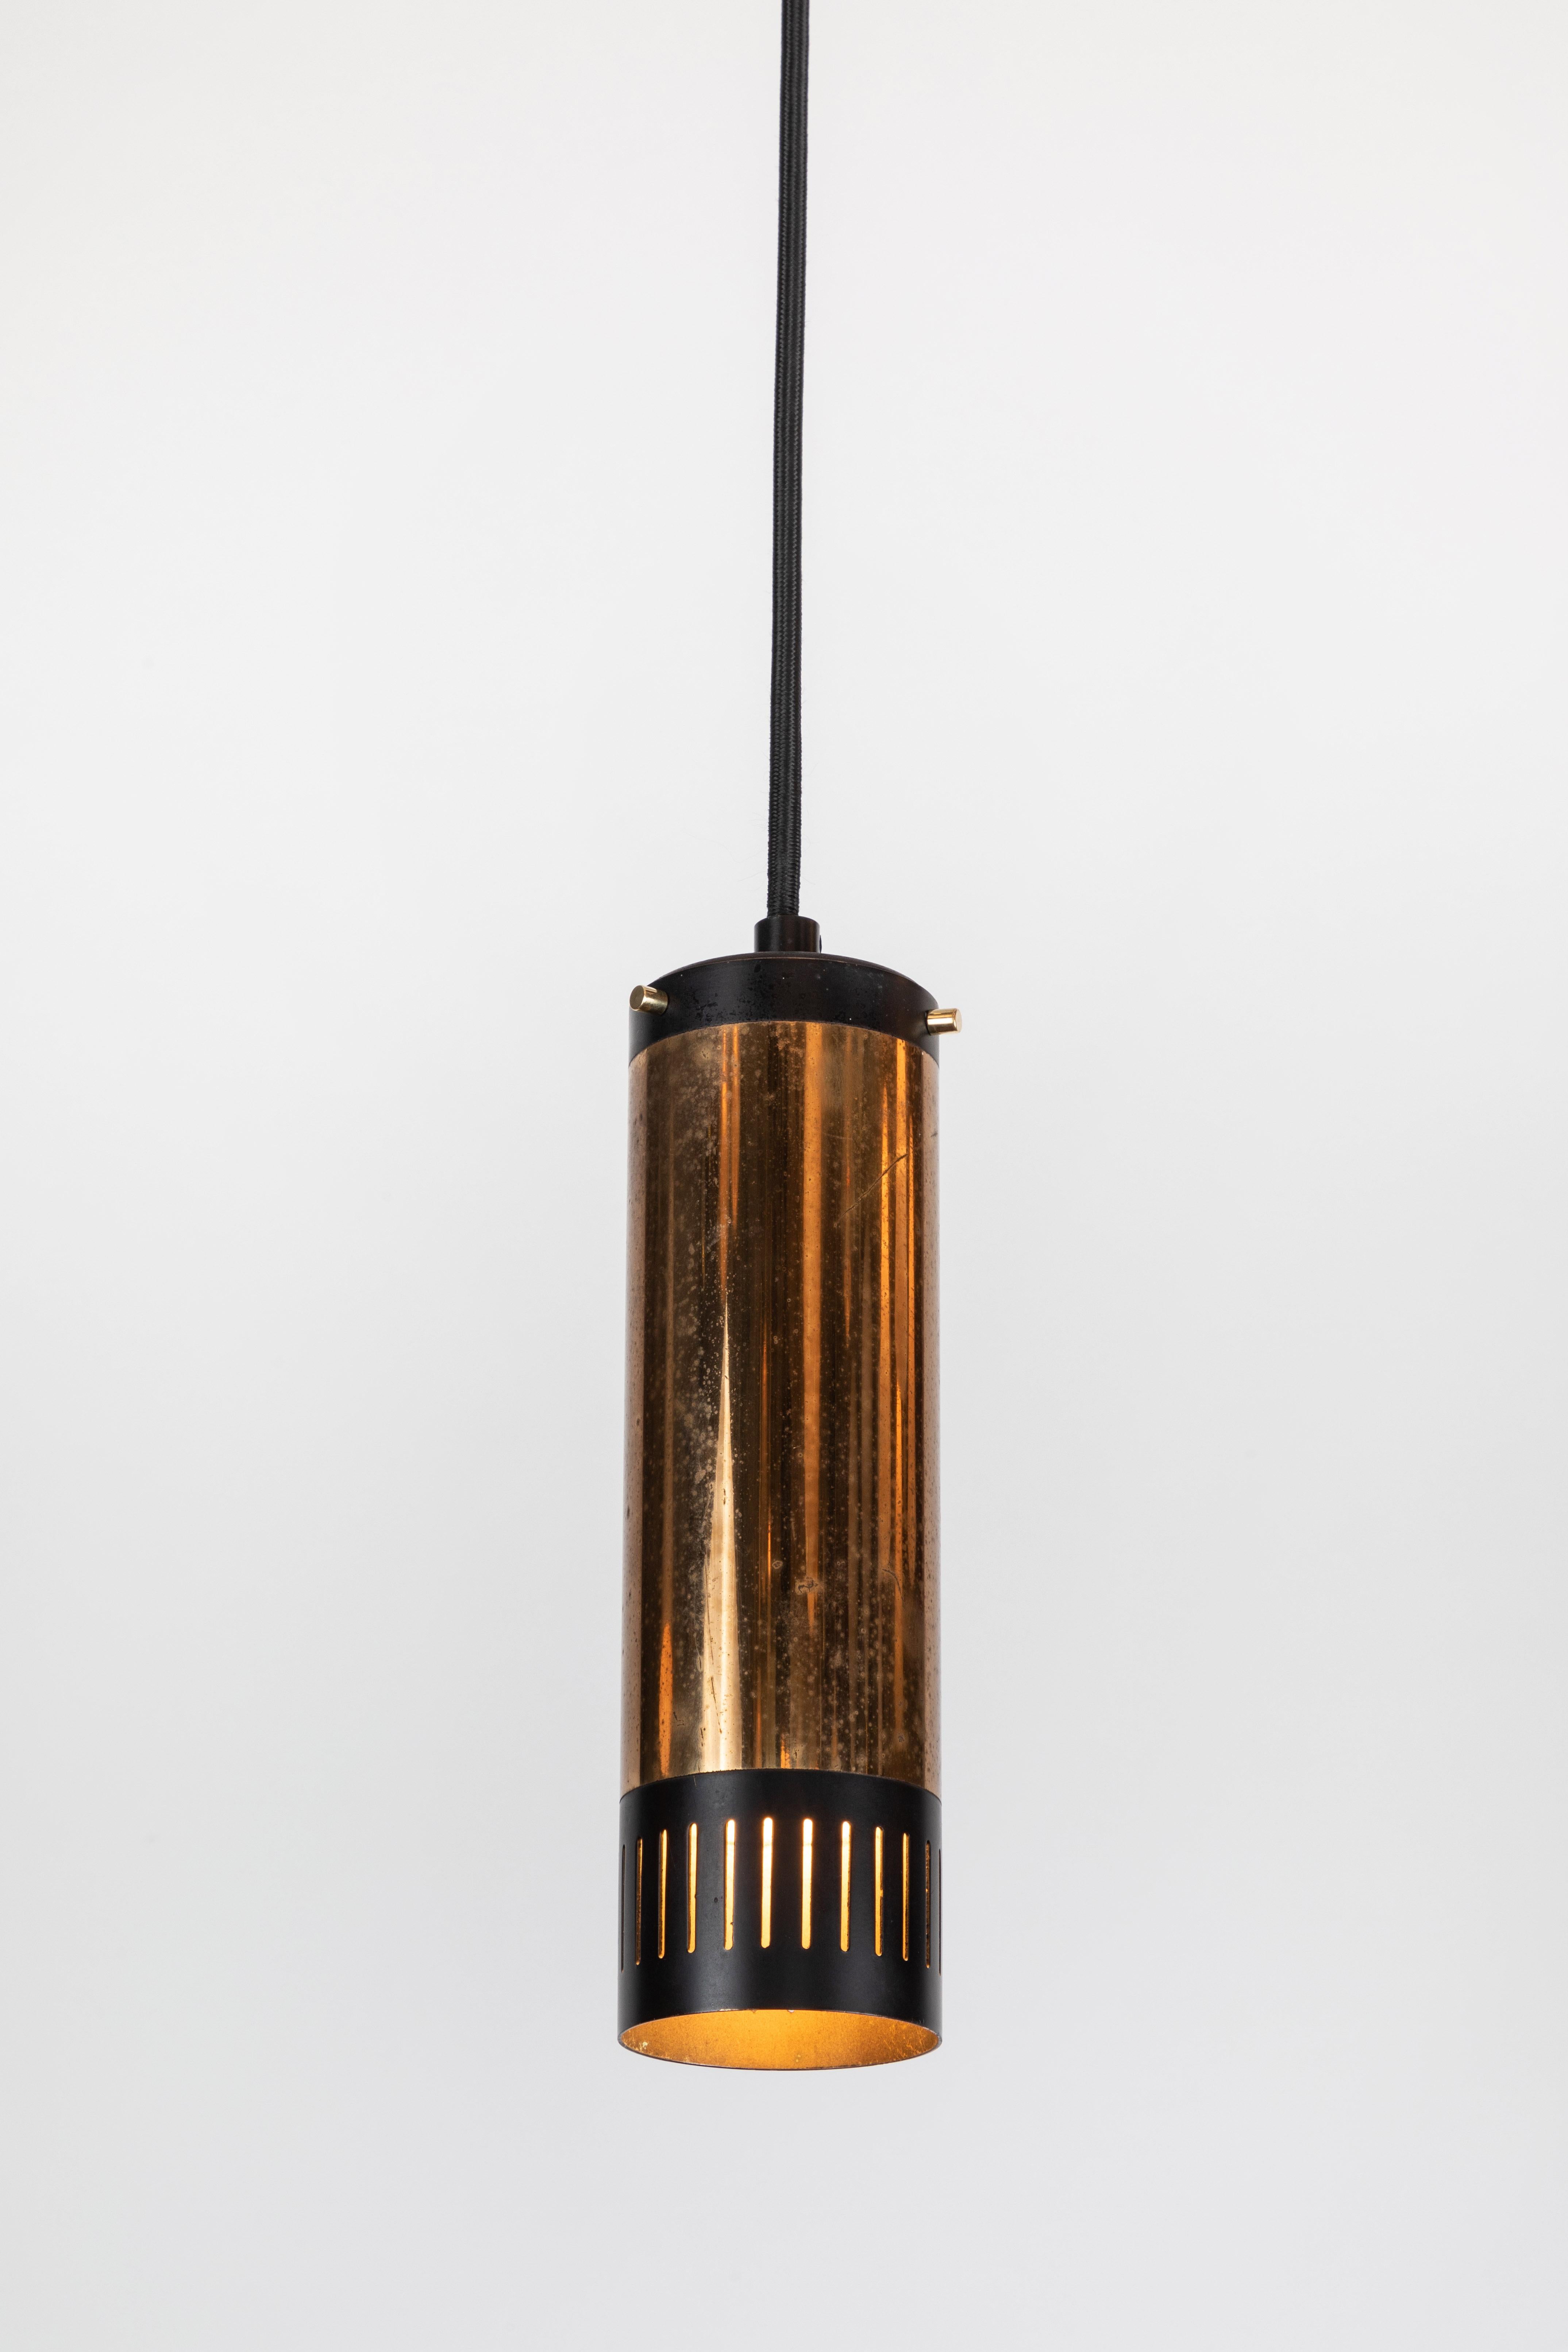 Painted 1950s Stilnovo Cylindrical Pendant with Yellow Label